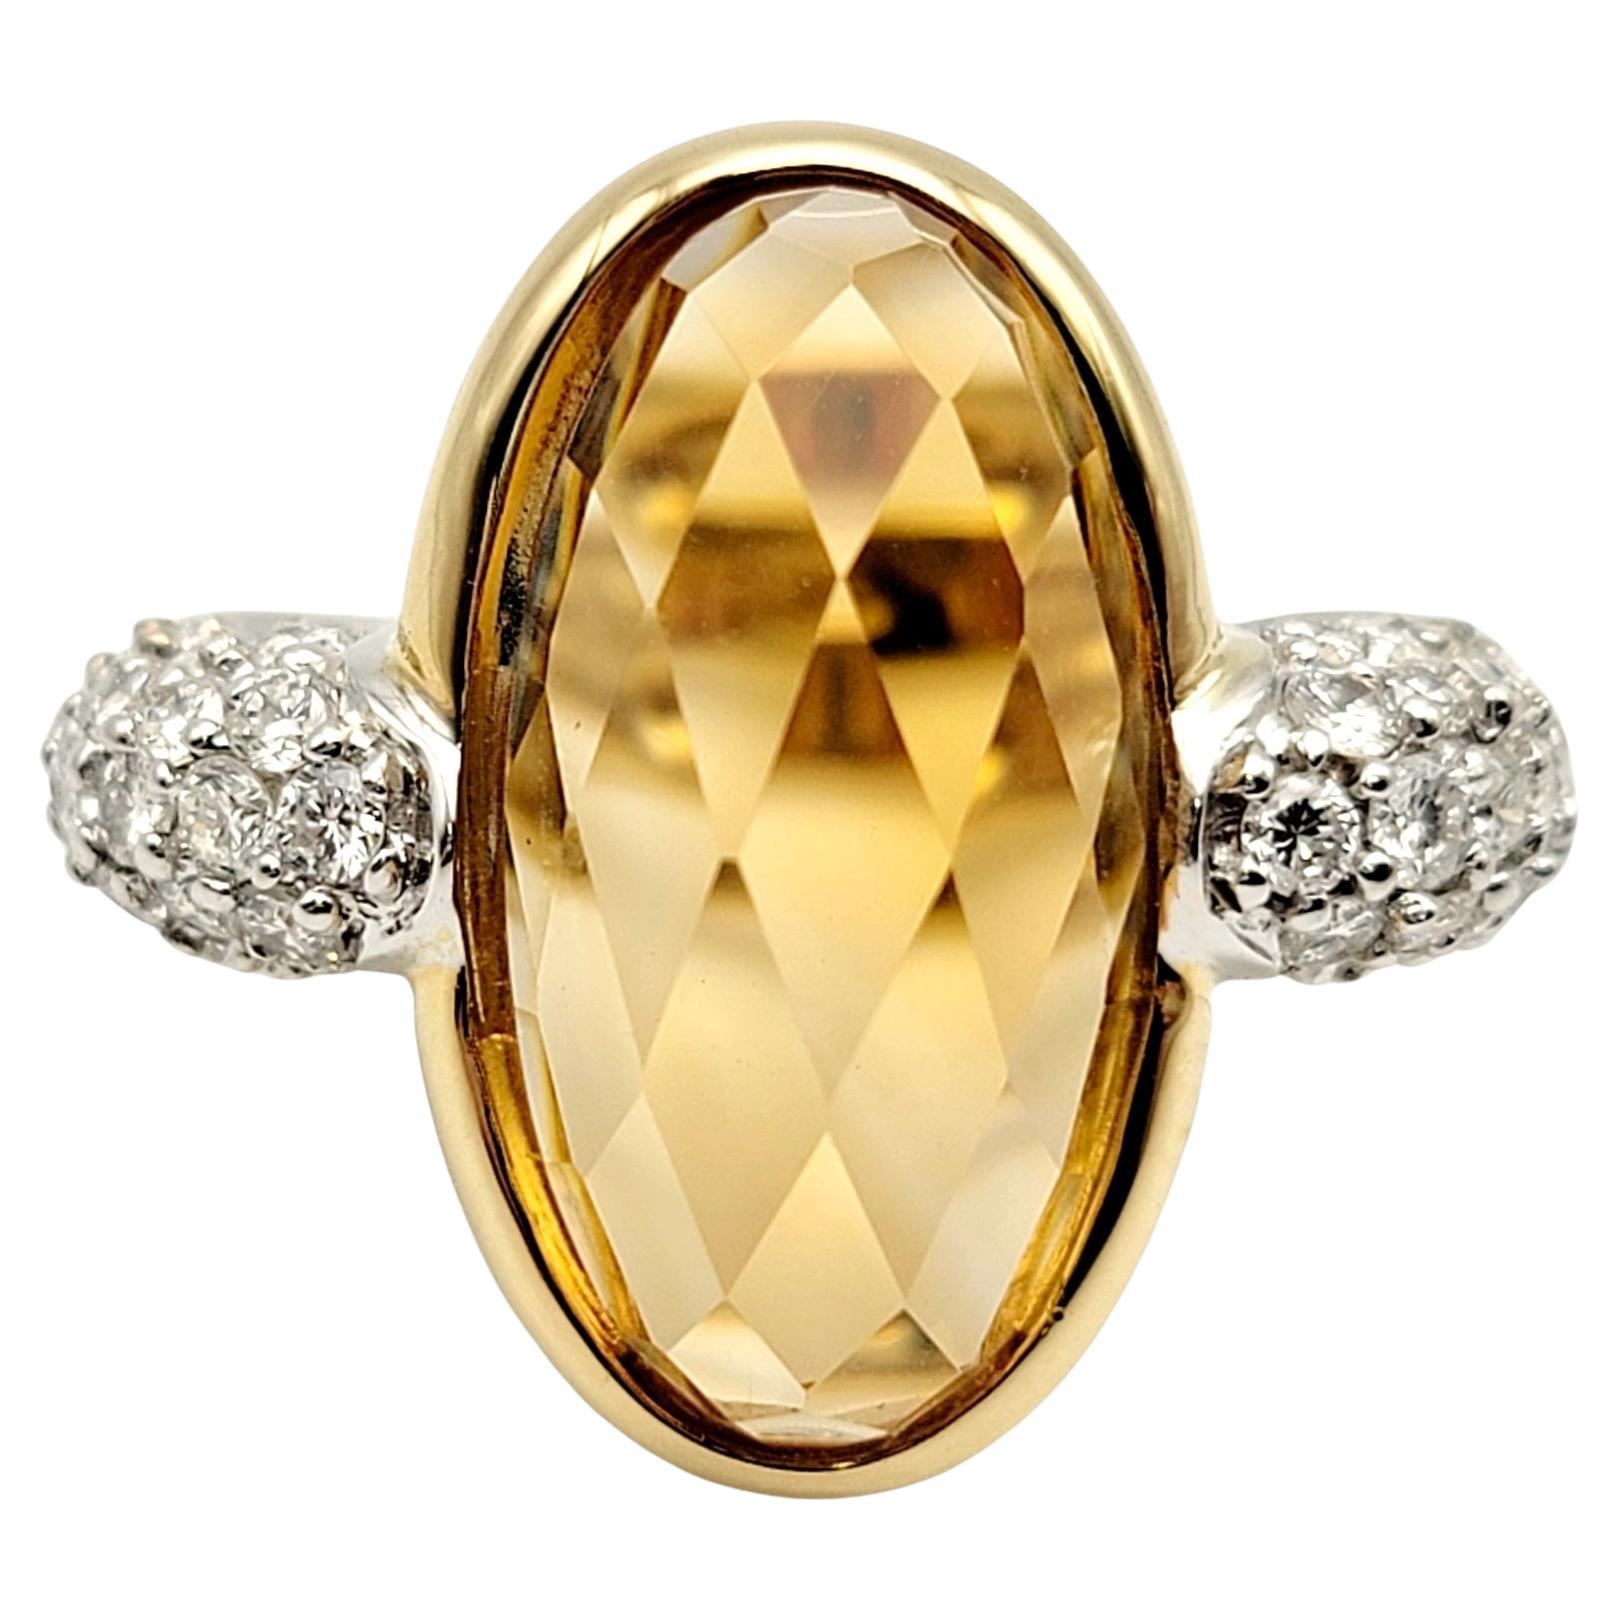 Large Fancy Cut Oval Citrine and Pave Diamond Ring in 18 Karat Yellow Gold